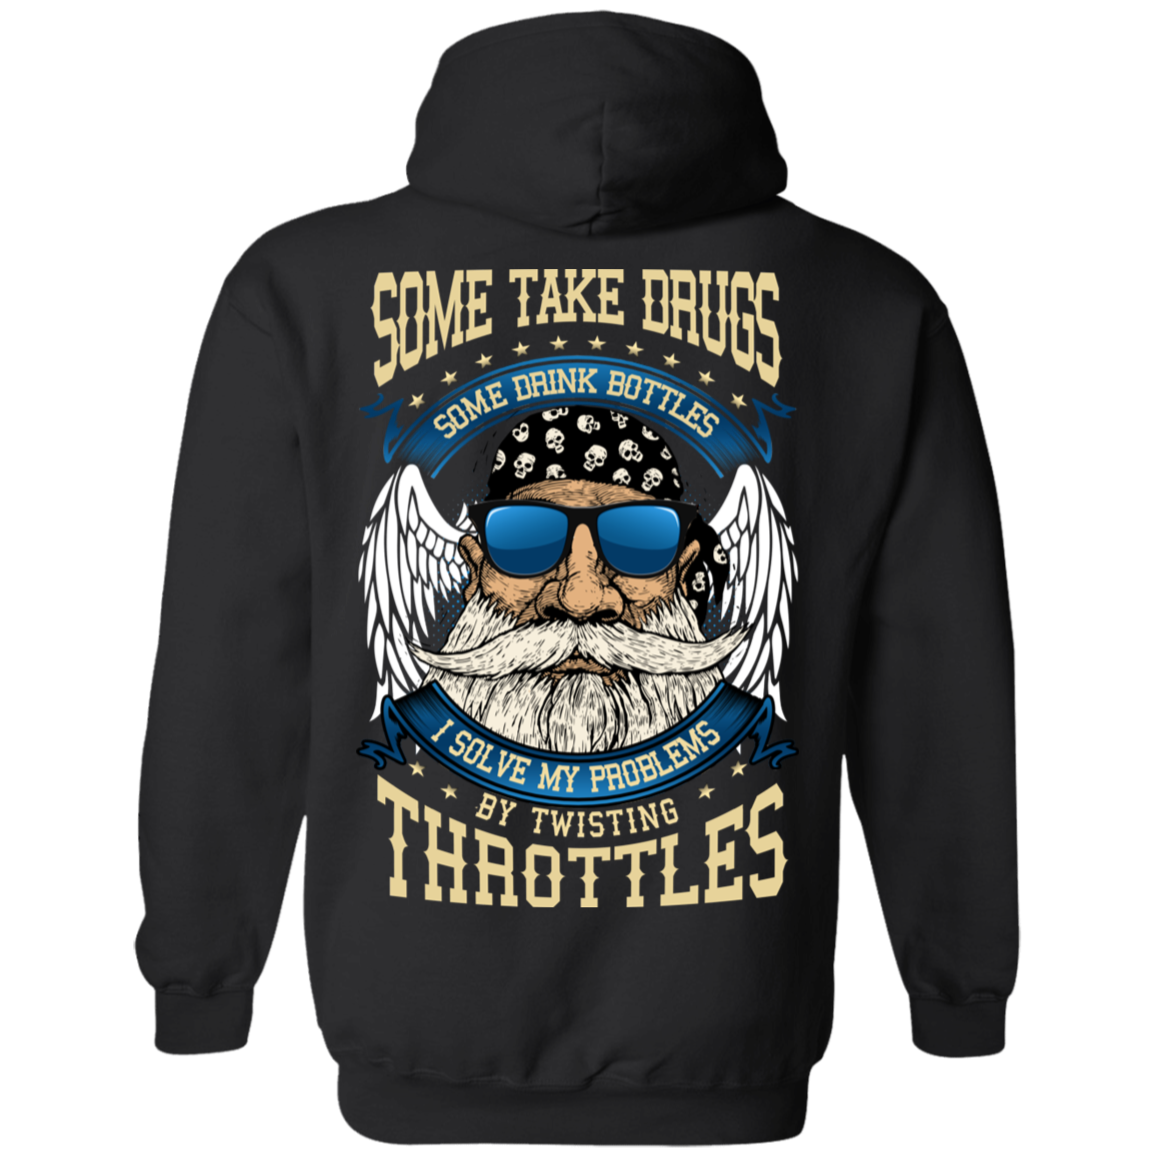 I Solve My Problems By Twisting Throttles Hoodie